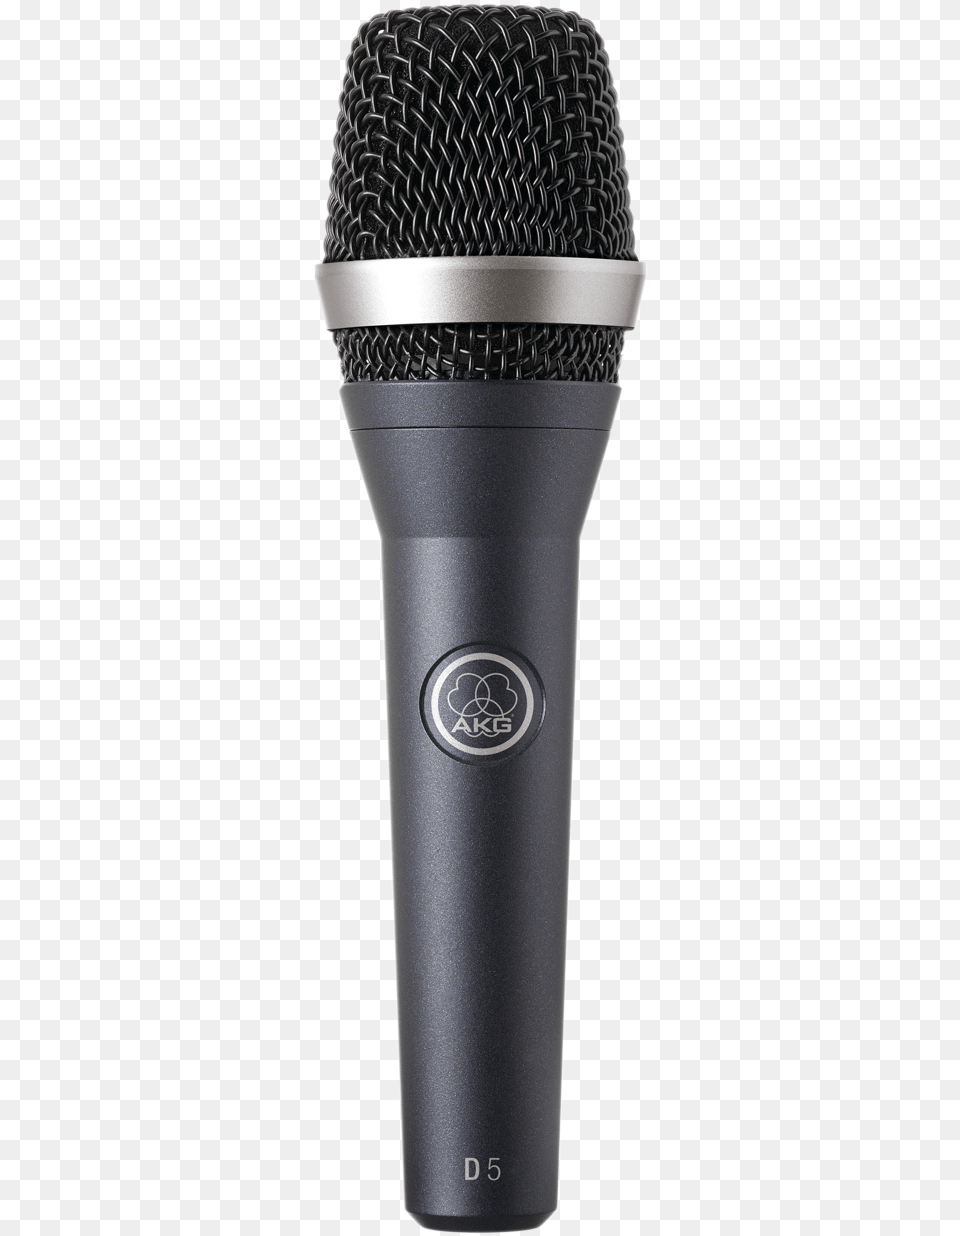 Mic Akg, Electrical Device, Microphone Png